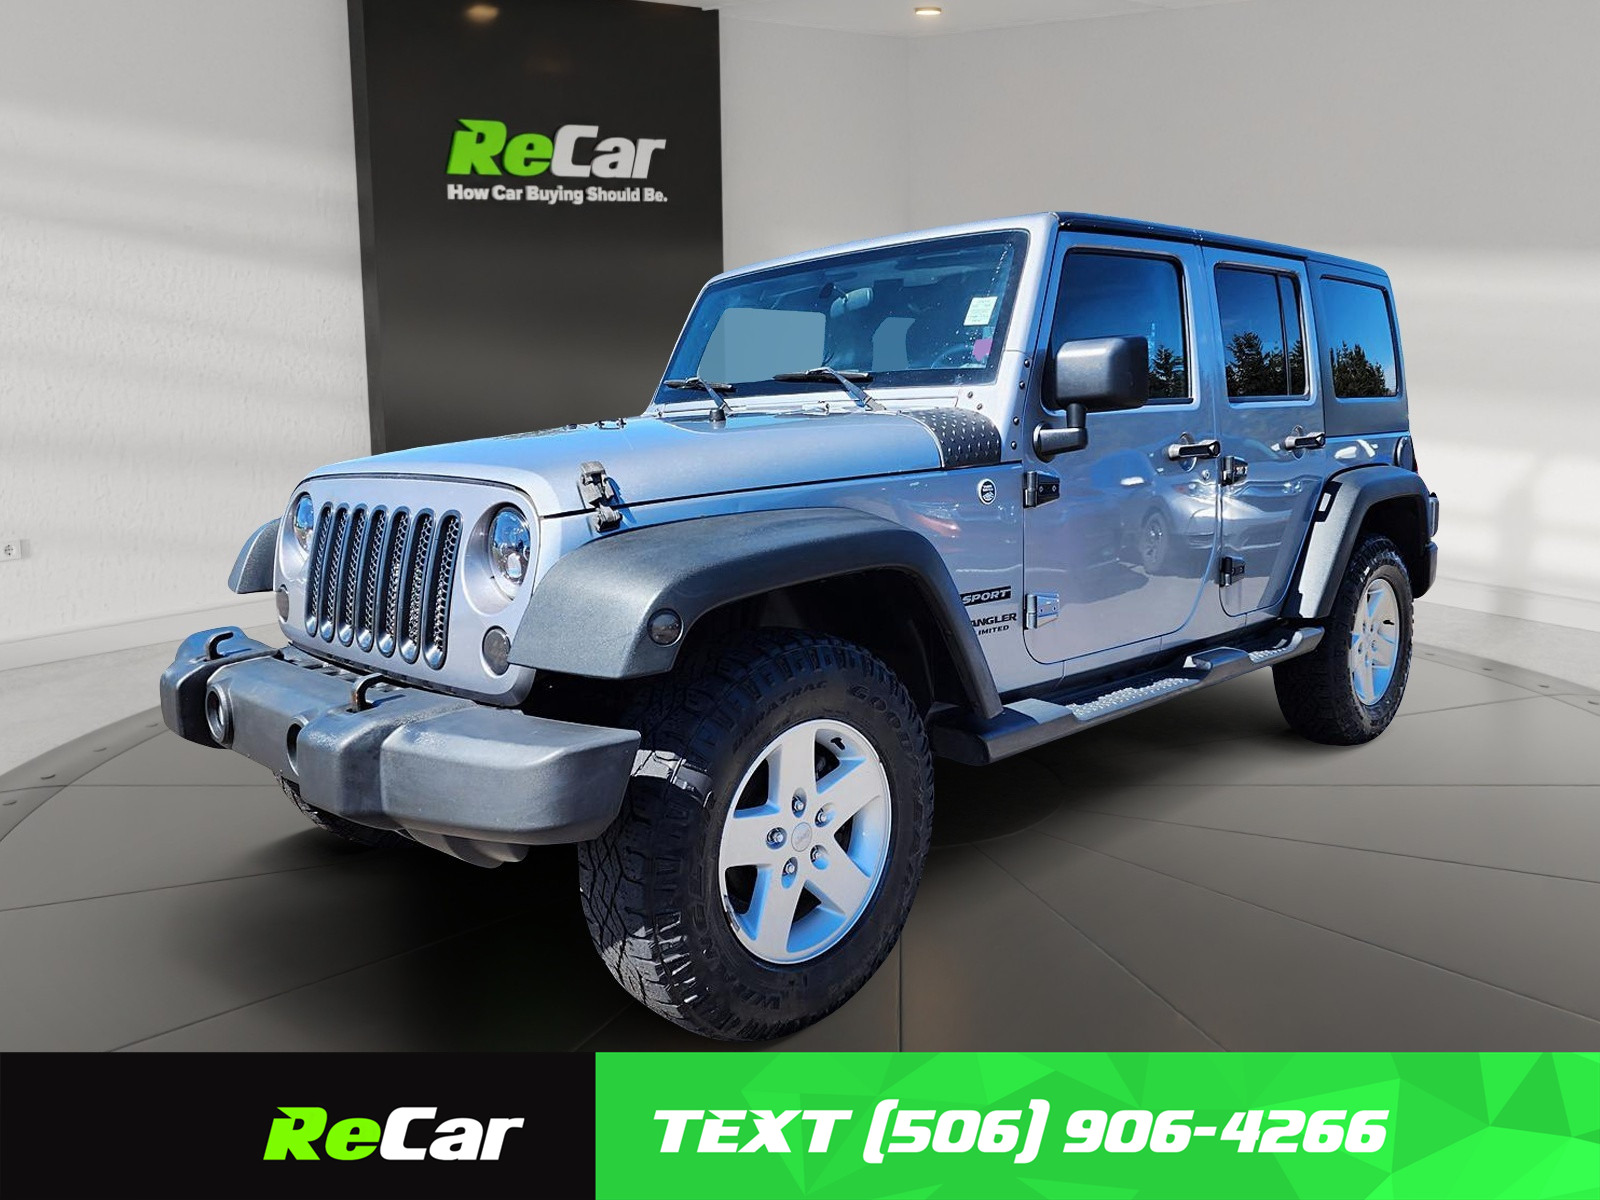 2015 Jeep WRANGLER UNLIMITED 4WD | 6-Speed Manual | Bluetooth | Hard Top | New 